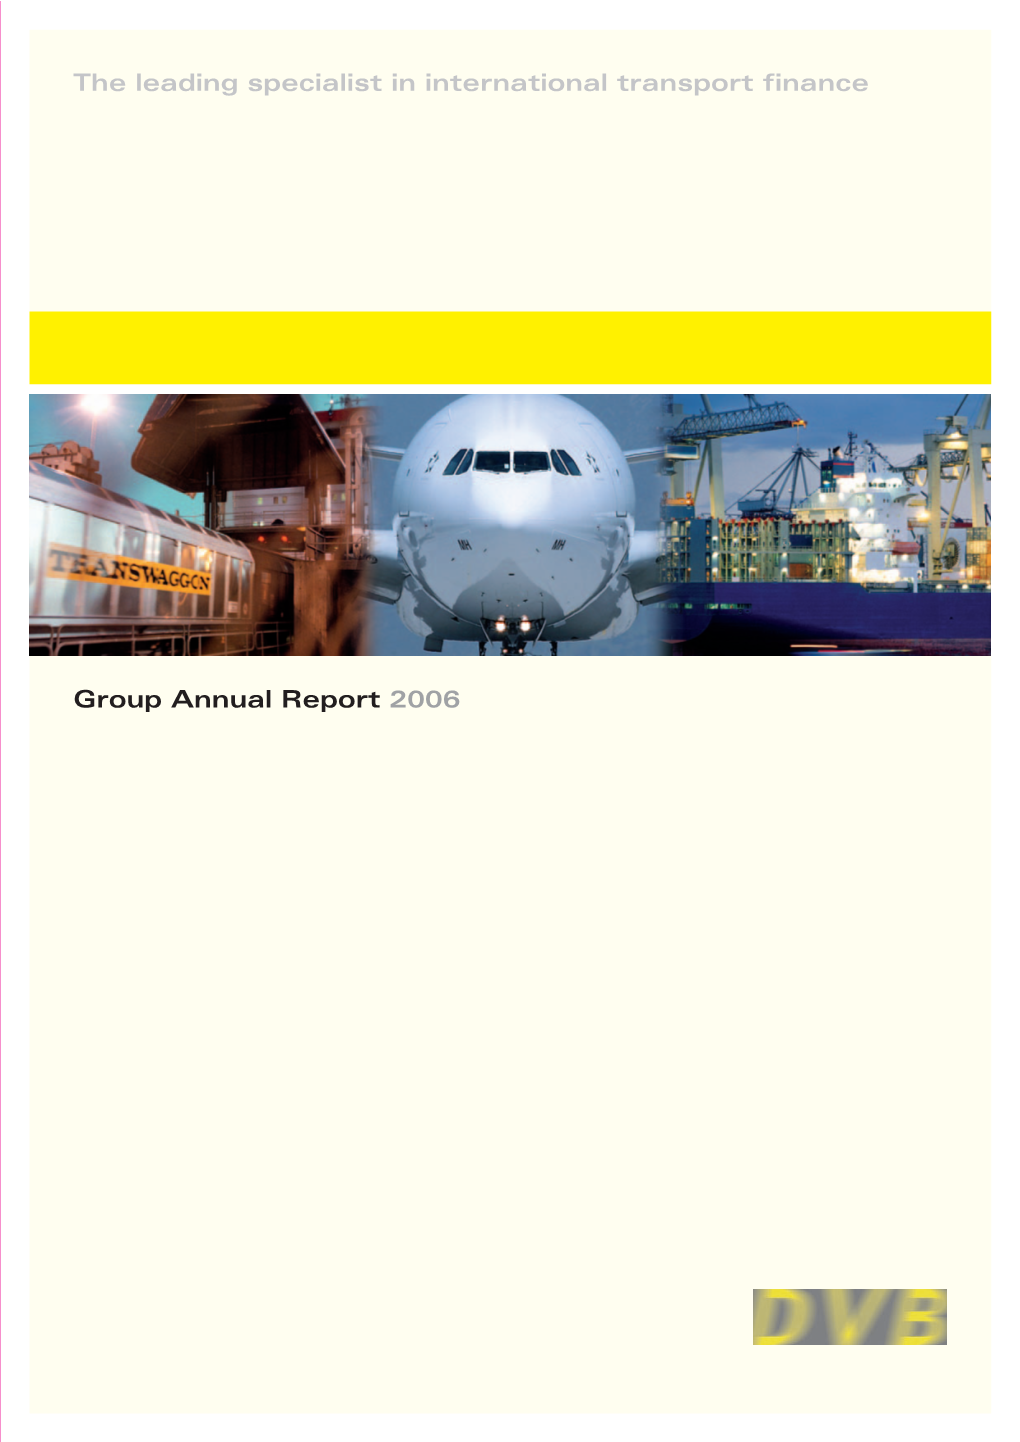 Group Annual Report 2006 the Leading Specialist in International